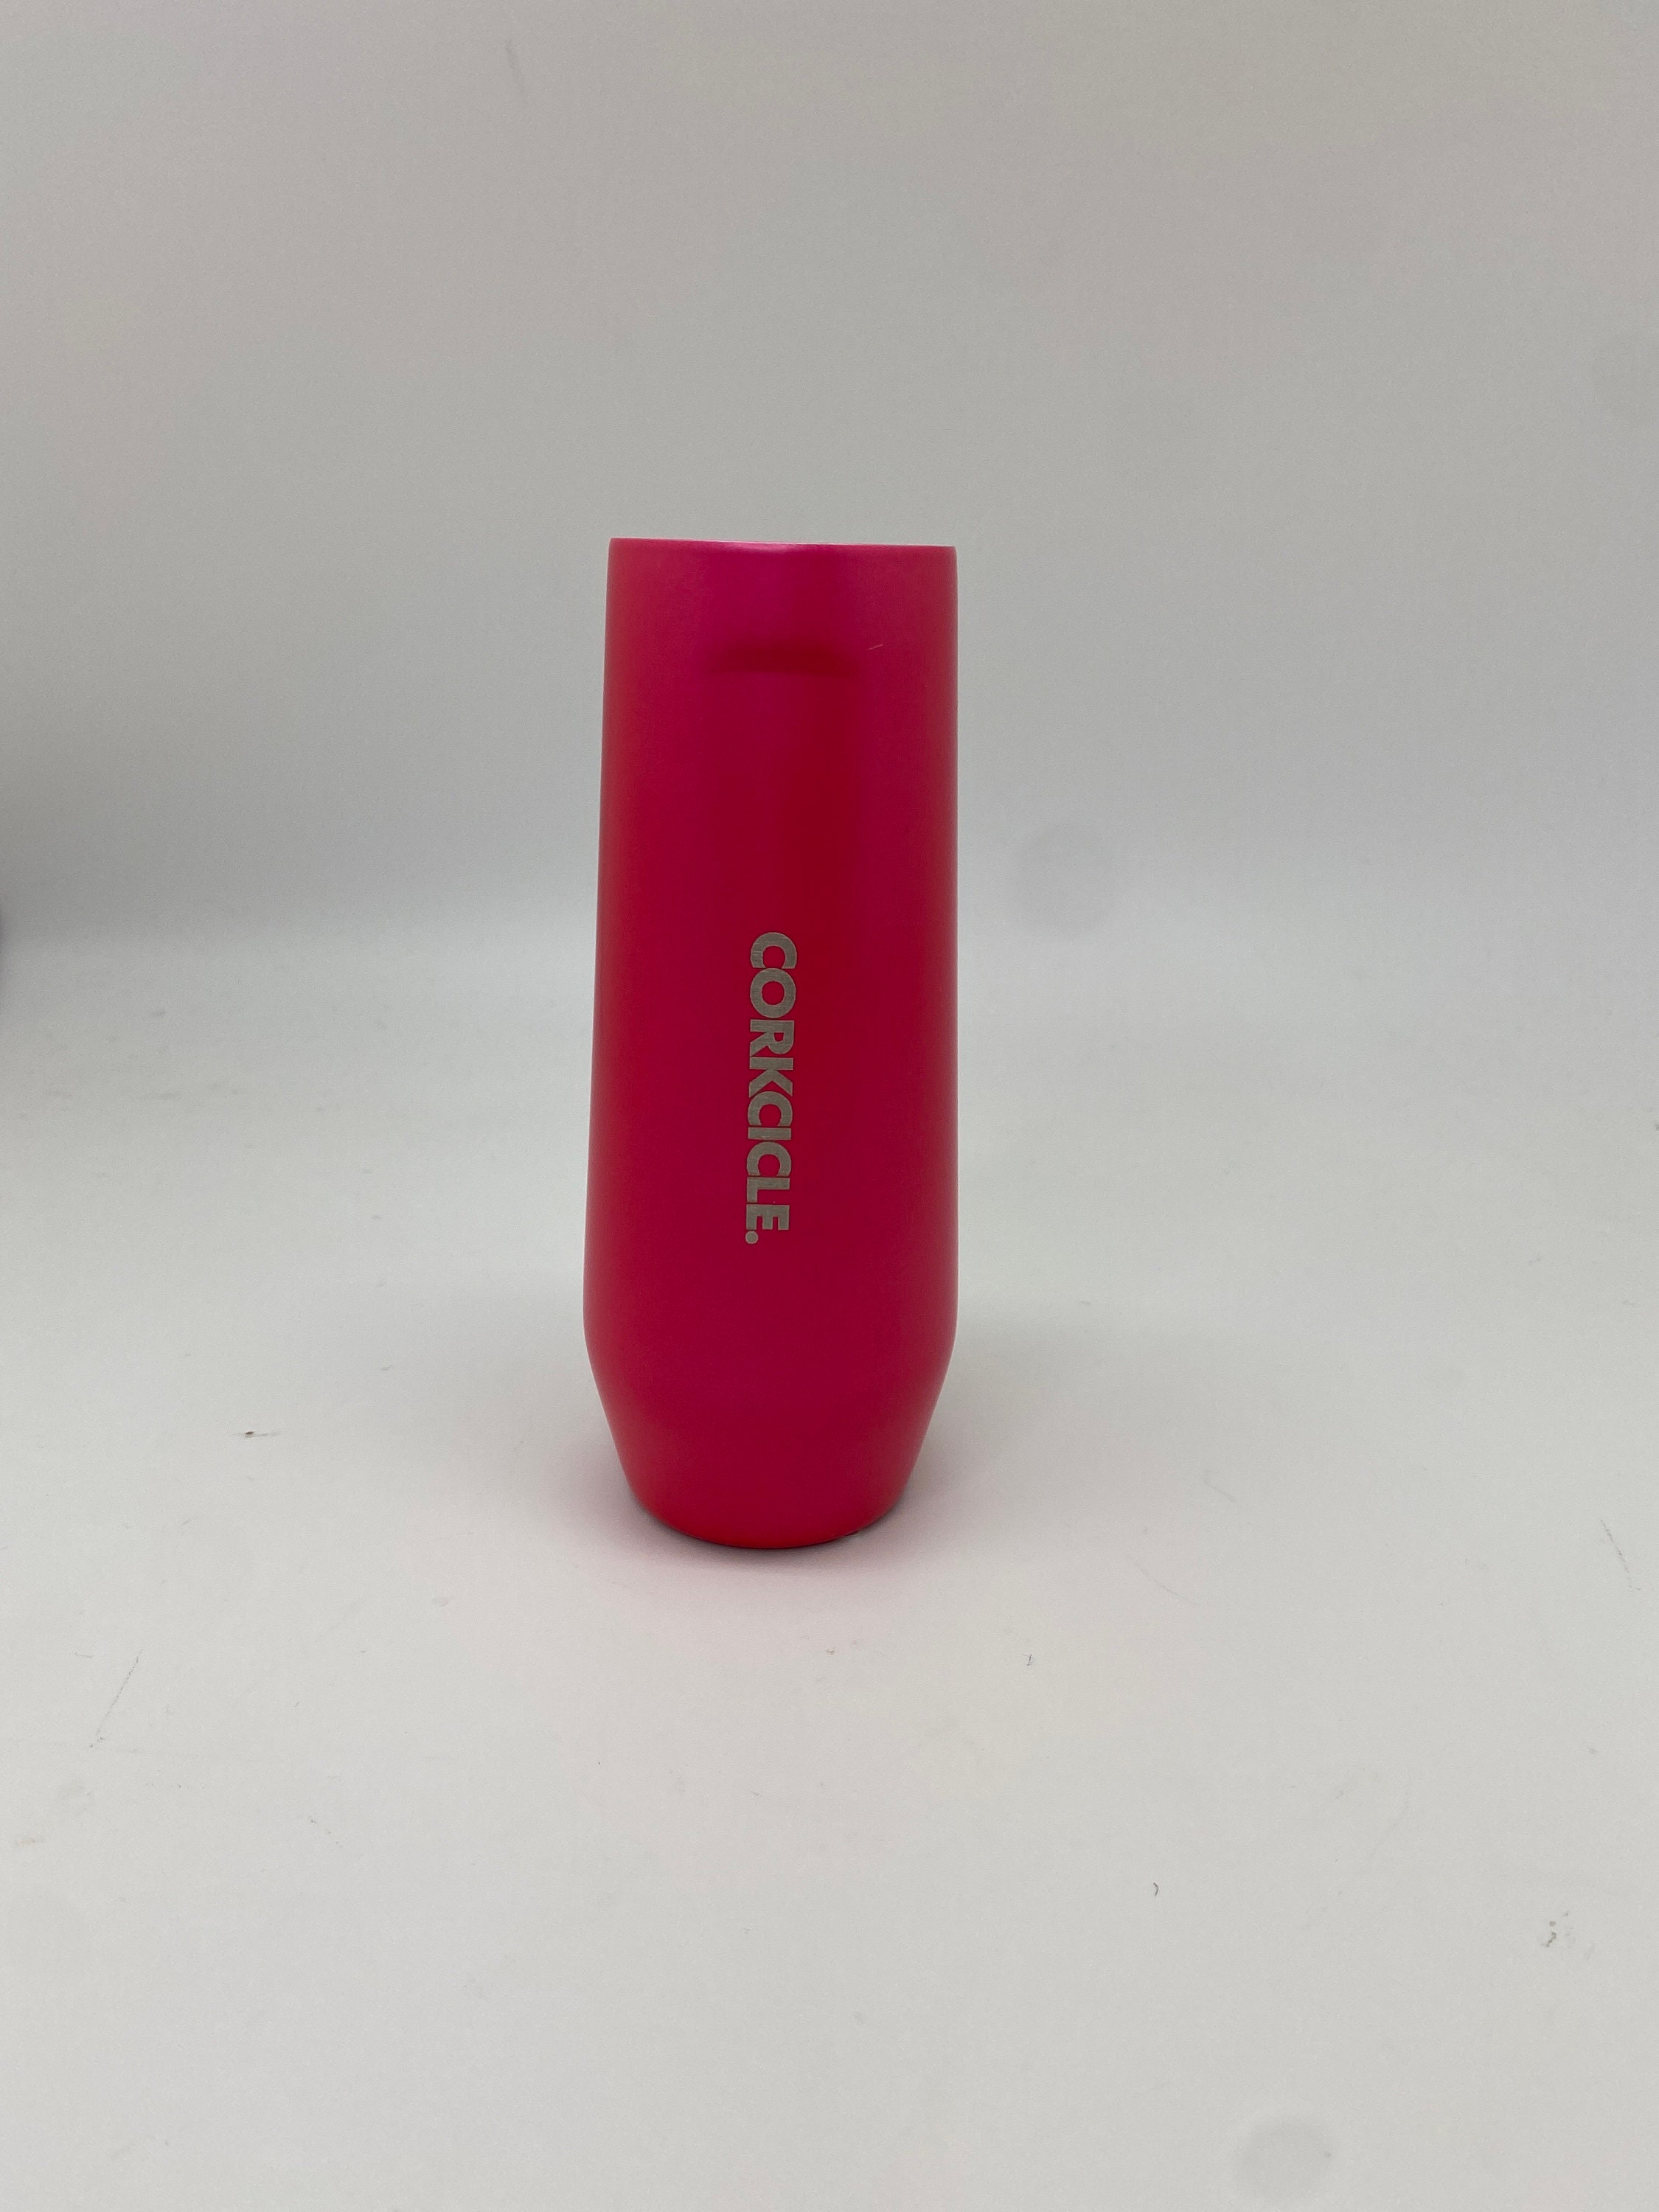 Corkcicle Stemless Flute Rose Metallic Insulated New 7 OZ 200 ML